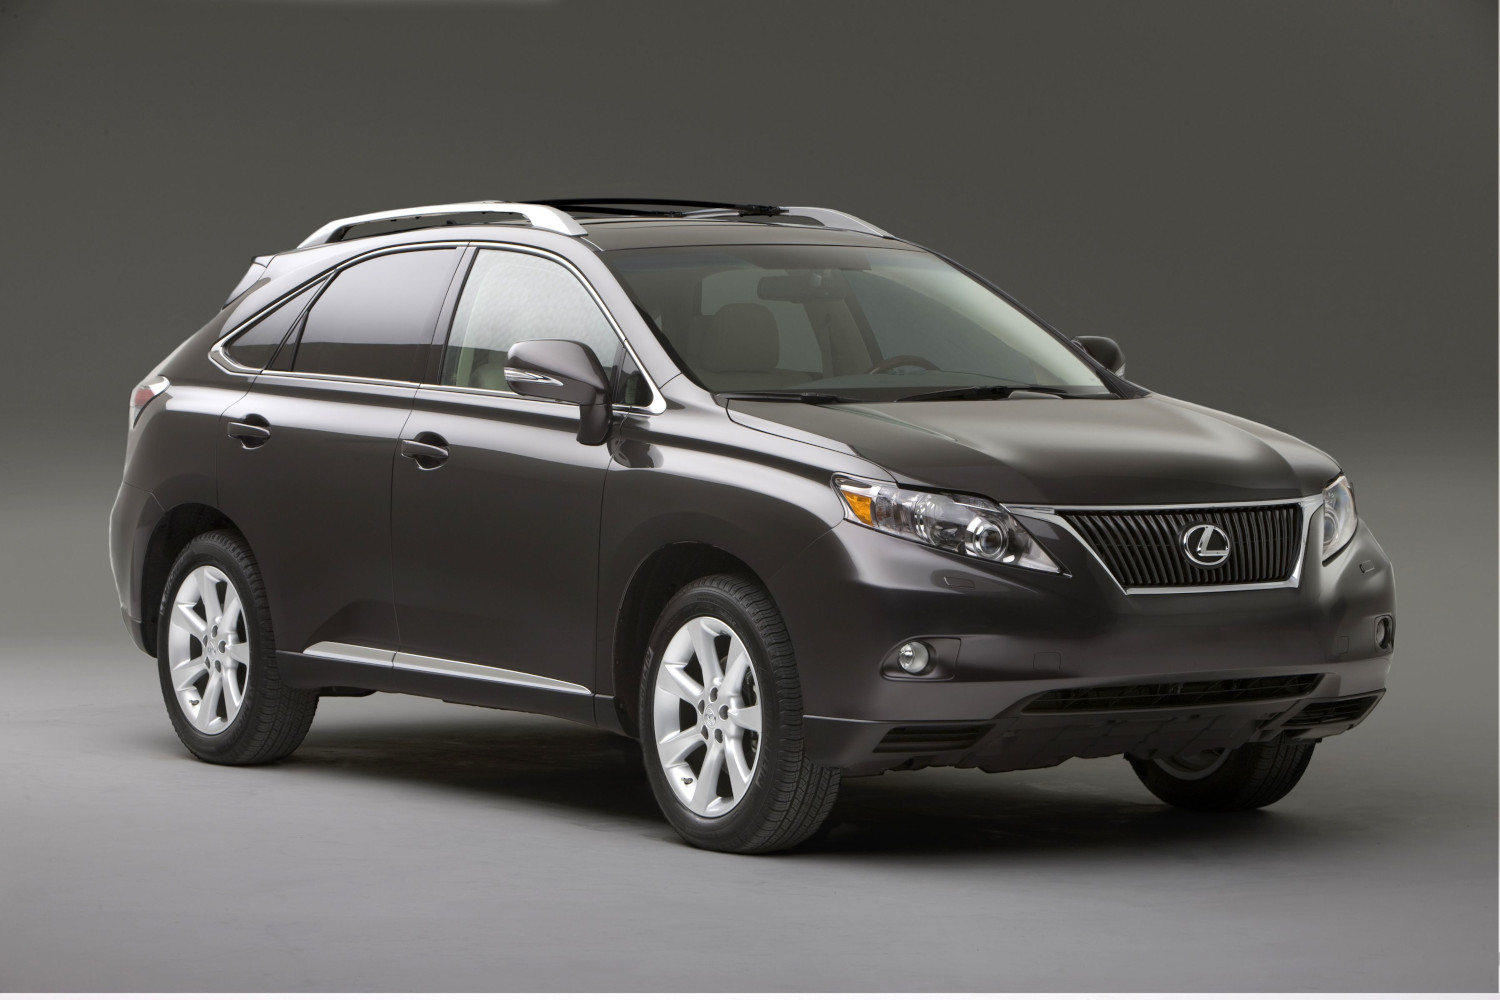 This Lexus RX 350 SUV is one of the best used SUVs